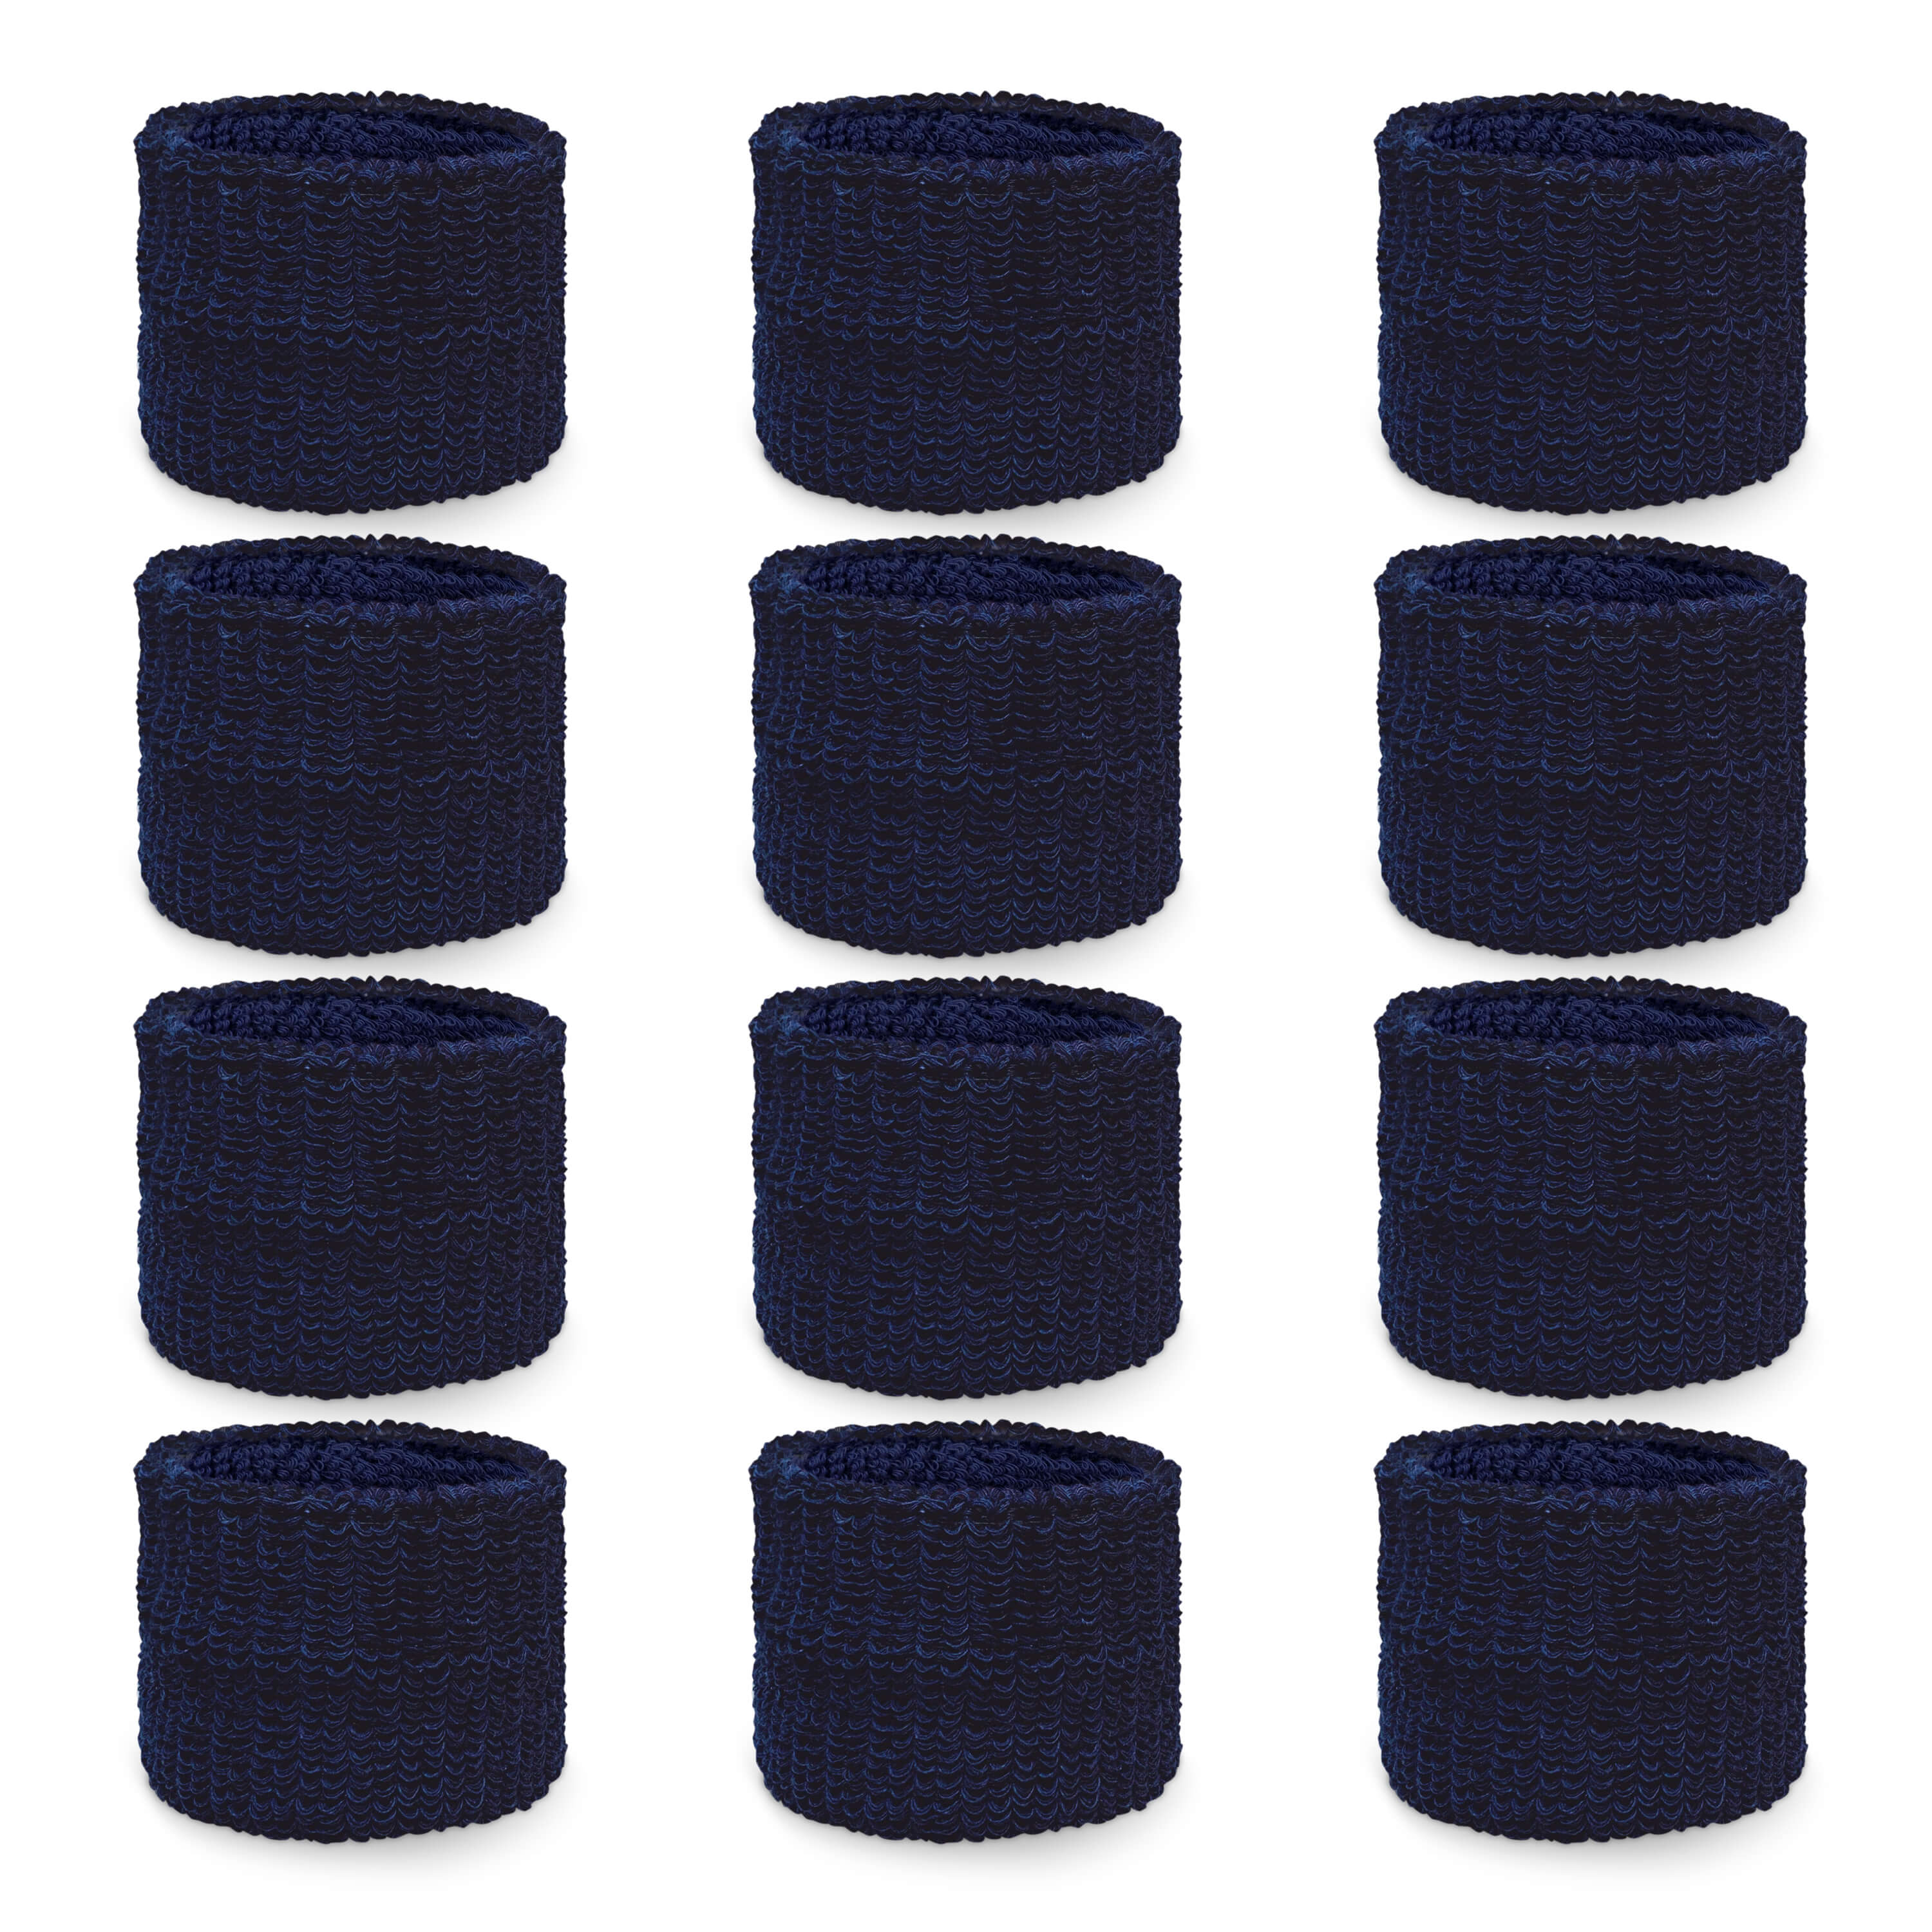 Navy Youth Junior Wrist bands Wholesale for School Church 6pairs